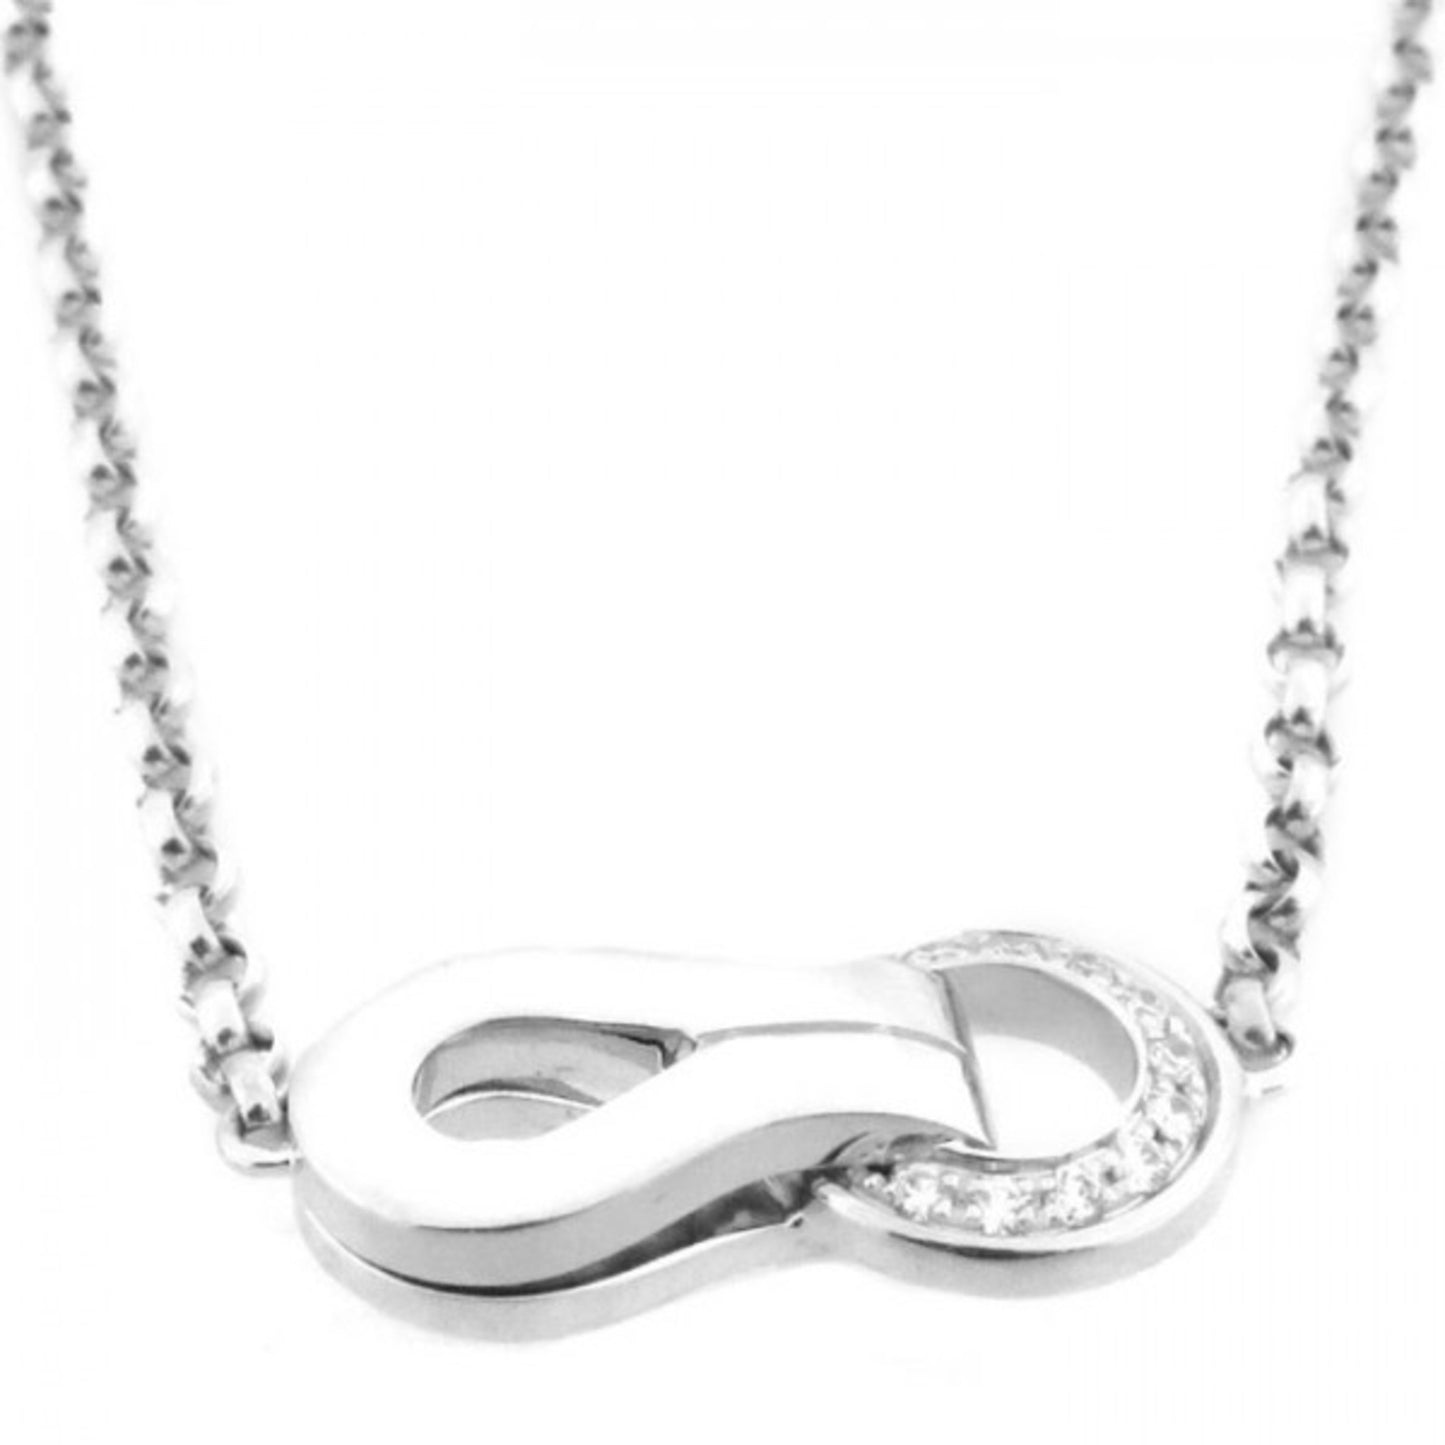 Cartier Women's White Gold Diamond Necklace by Cartier in White